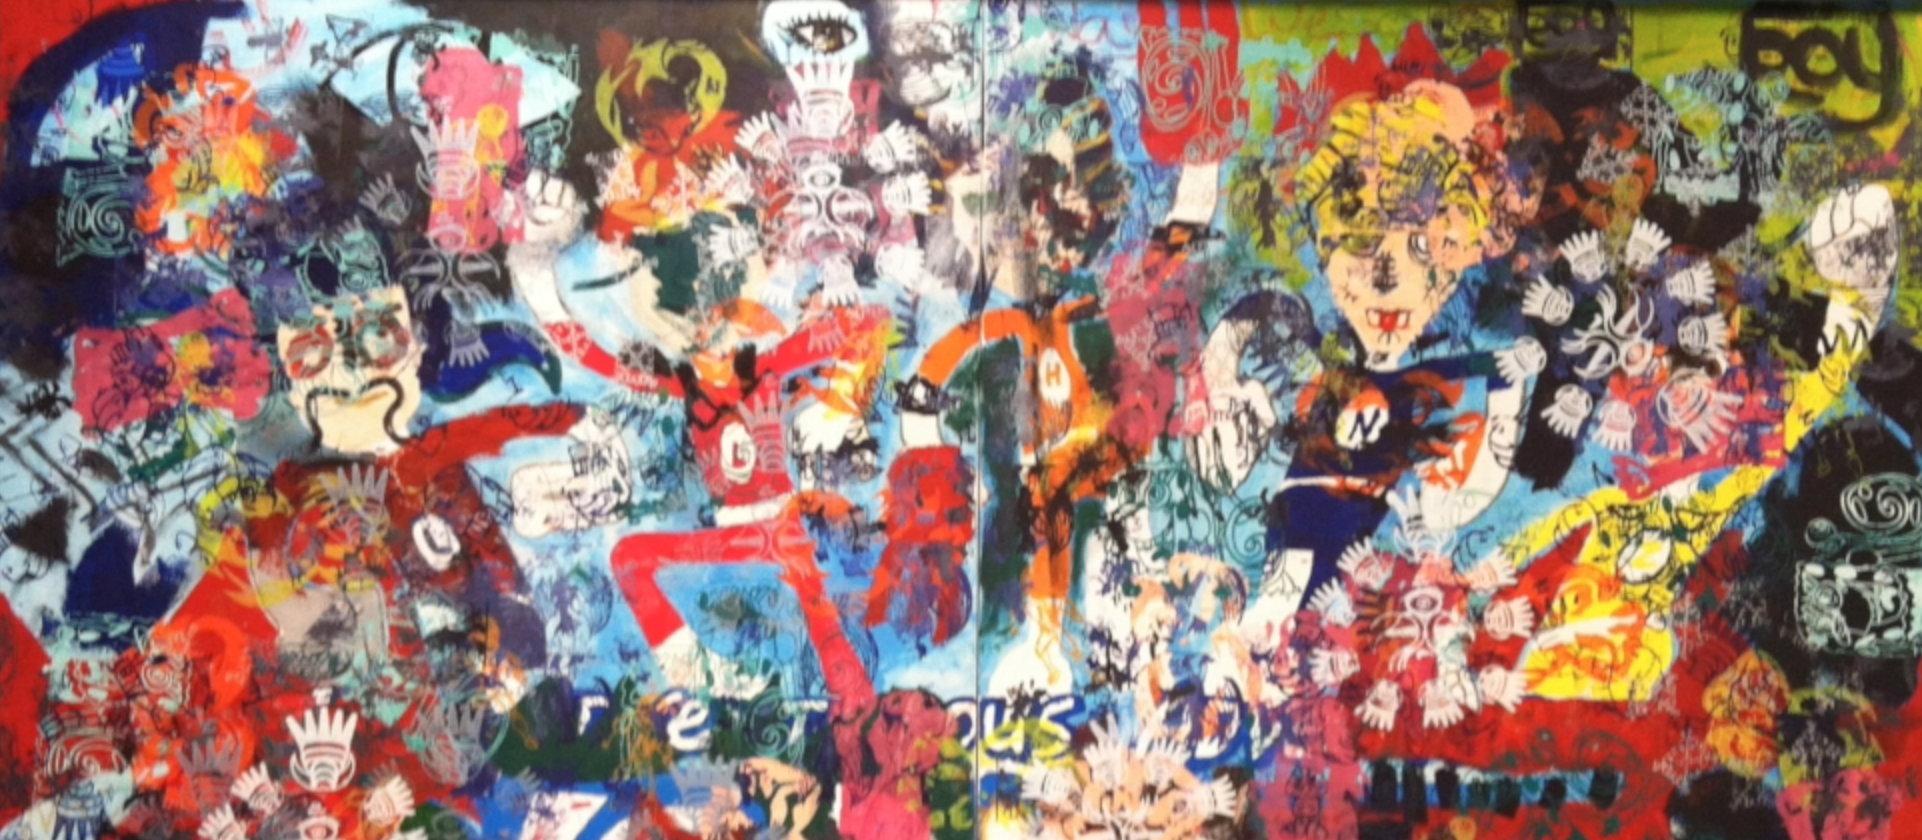 Picture of screen printed collage mural by Lance Owens at teens in south Madison